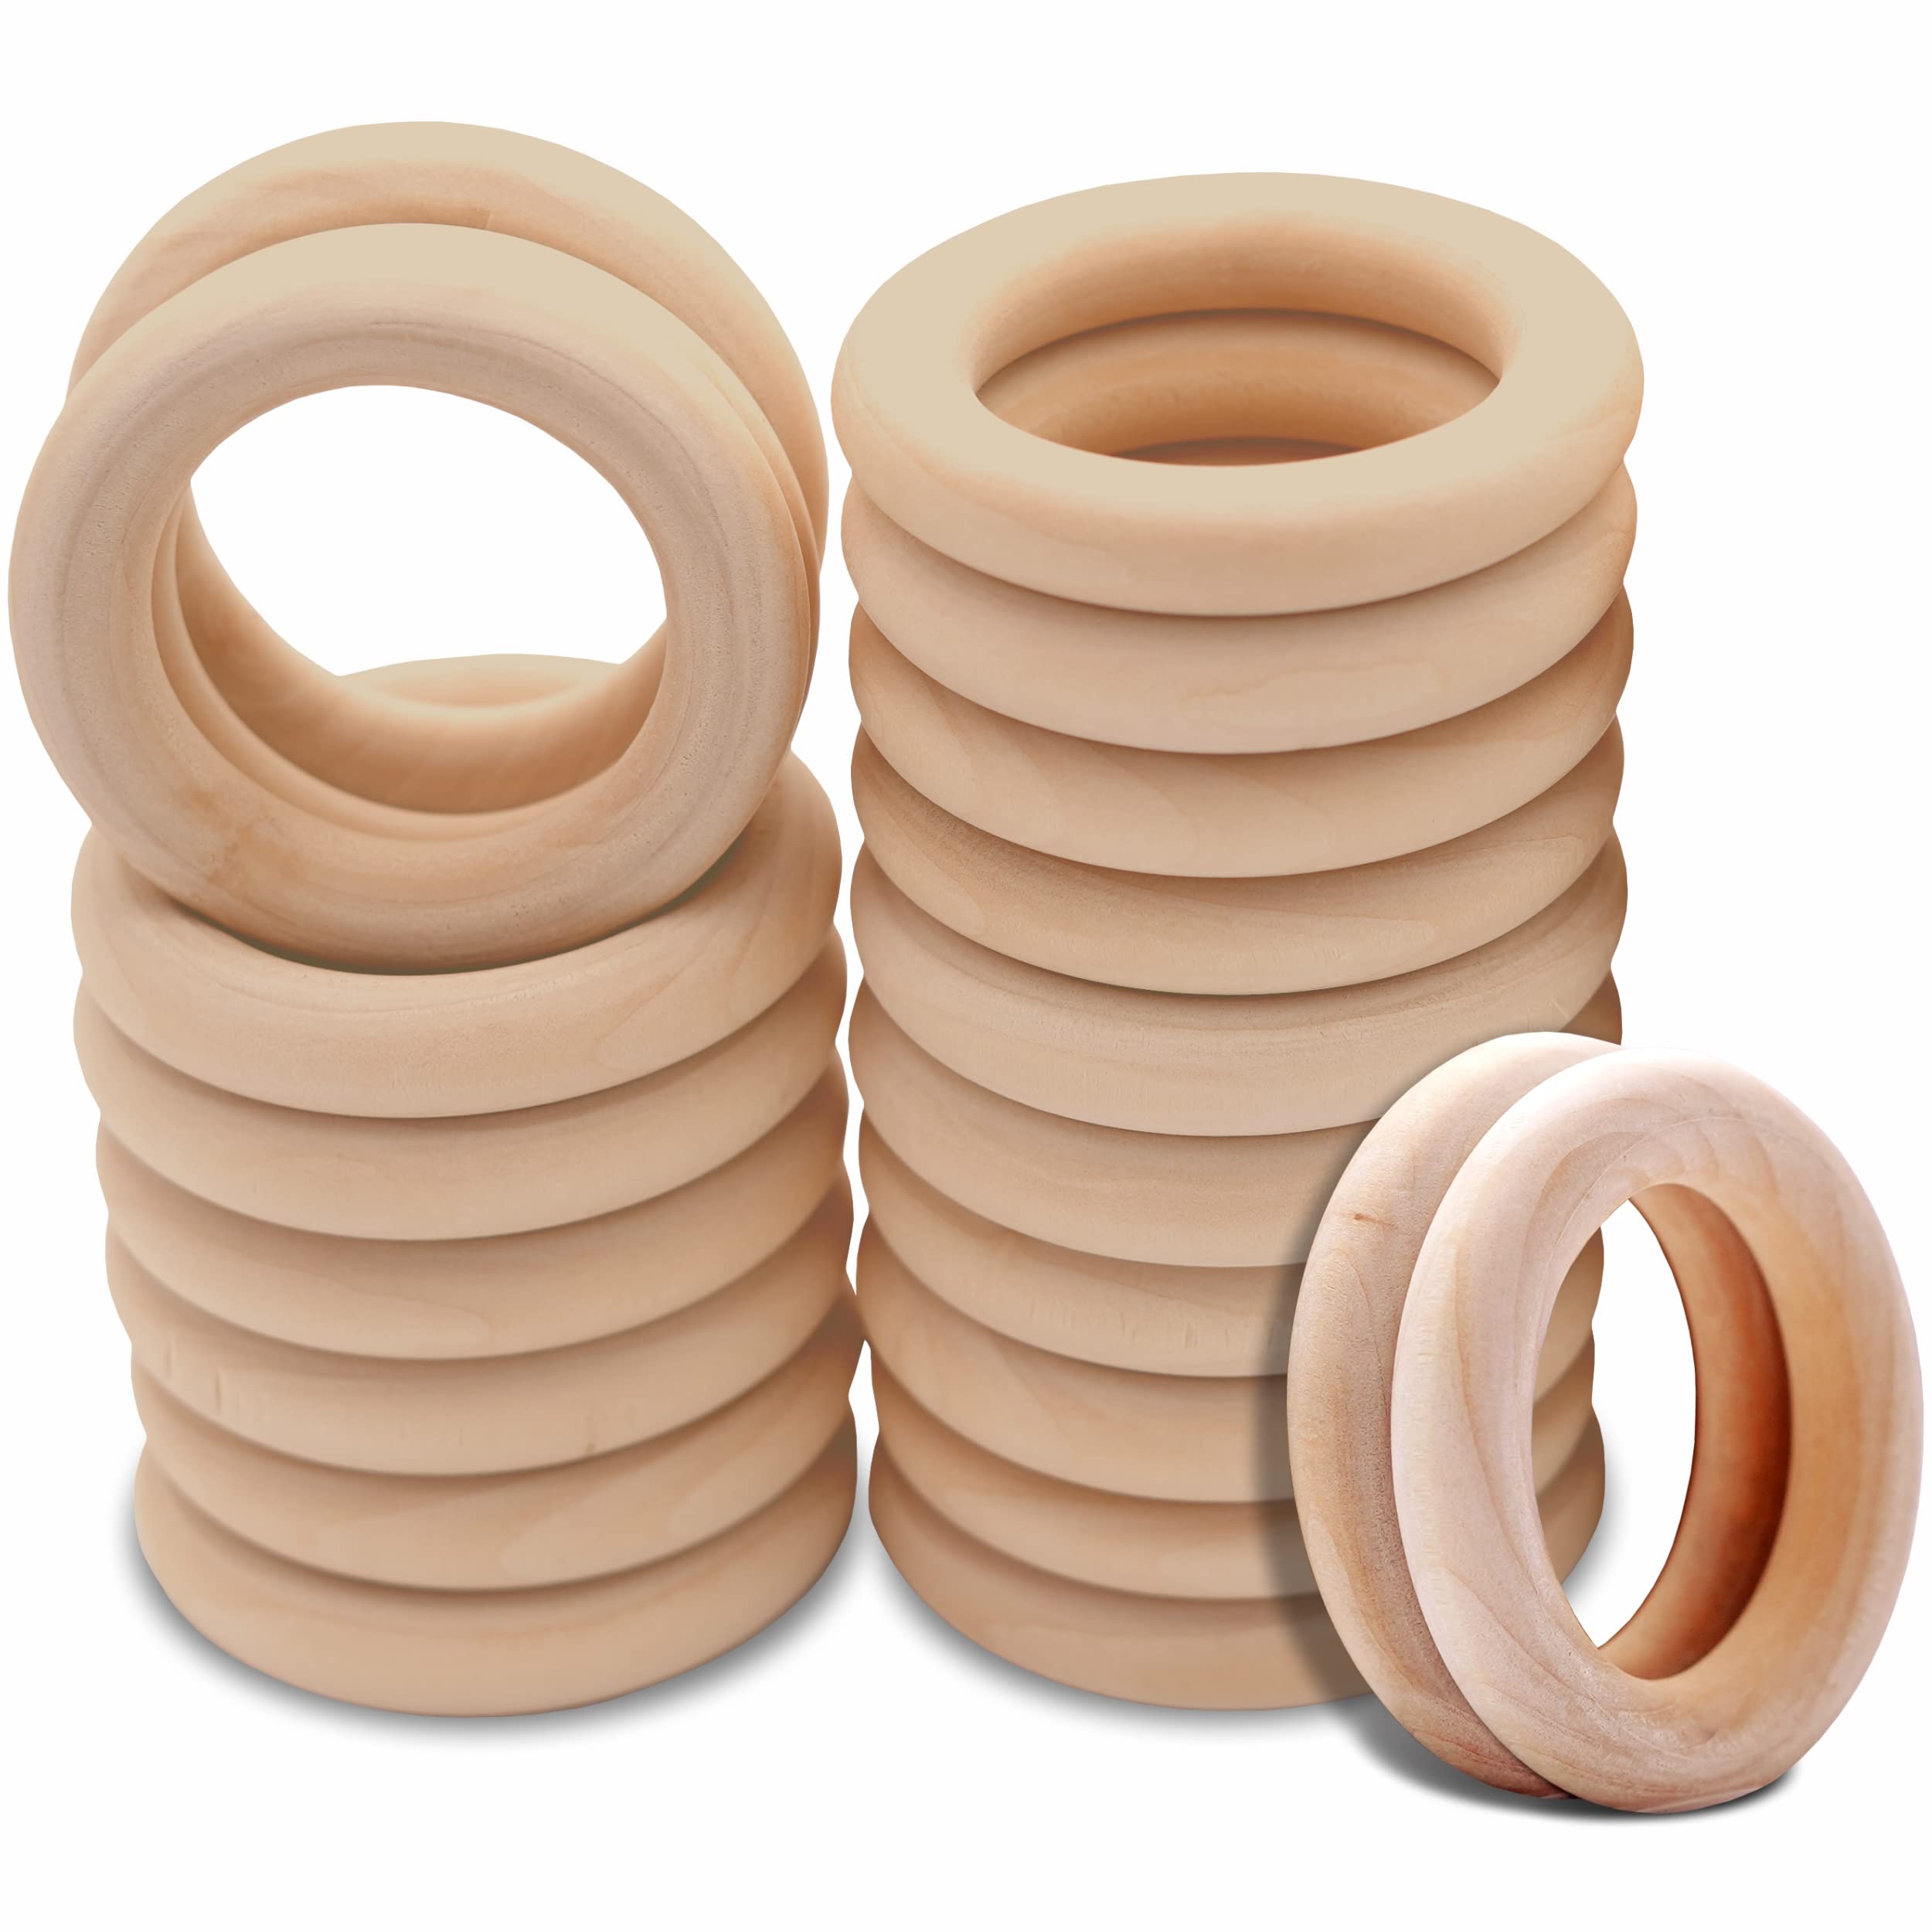 WUUDAR 20Pcs Wooden Rings for Crafts 55mm - Smooth Unfinished Macrame Rings  Durable & Lightweight Wood Rings for Jewelry DIY Making Crafts & Home Decor